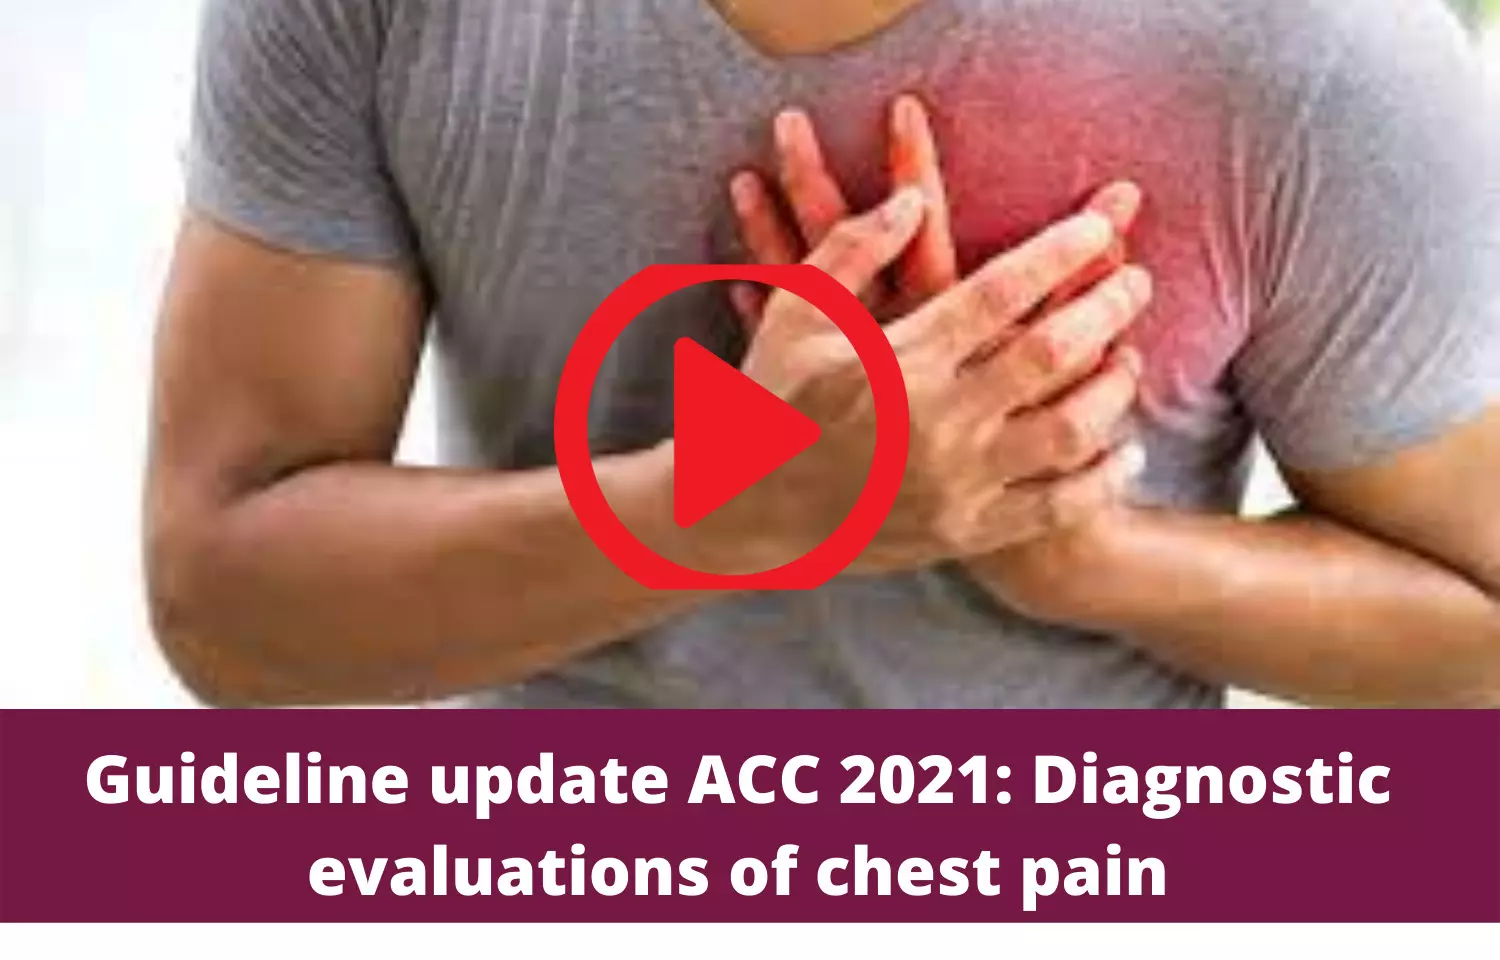 Guideline update ACC 2021: Diagnostic evaluations of chest pain